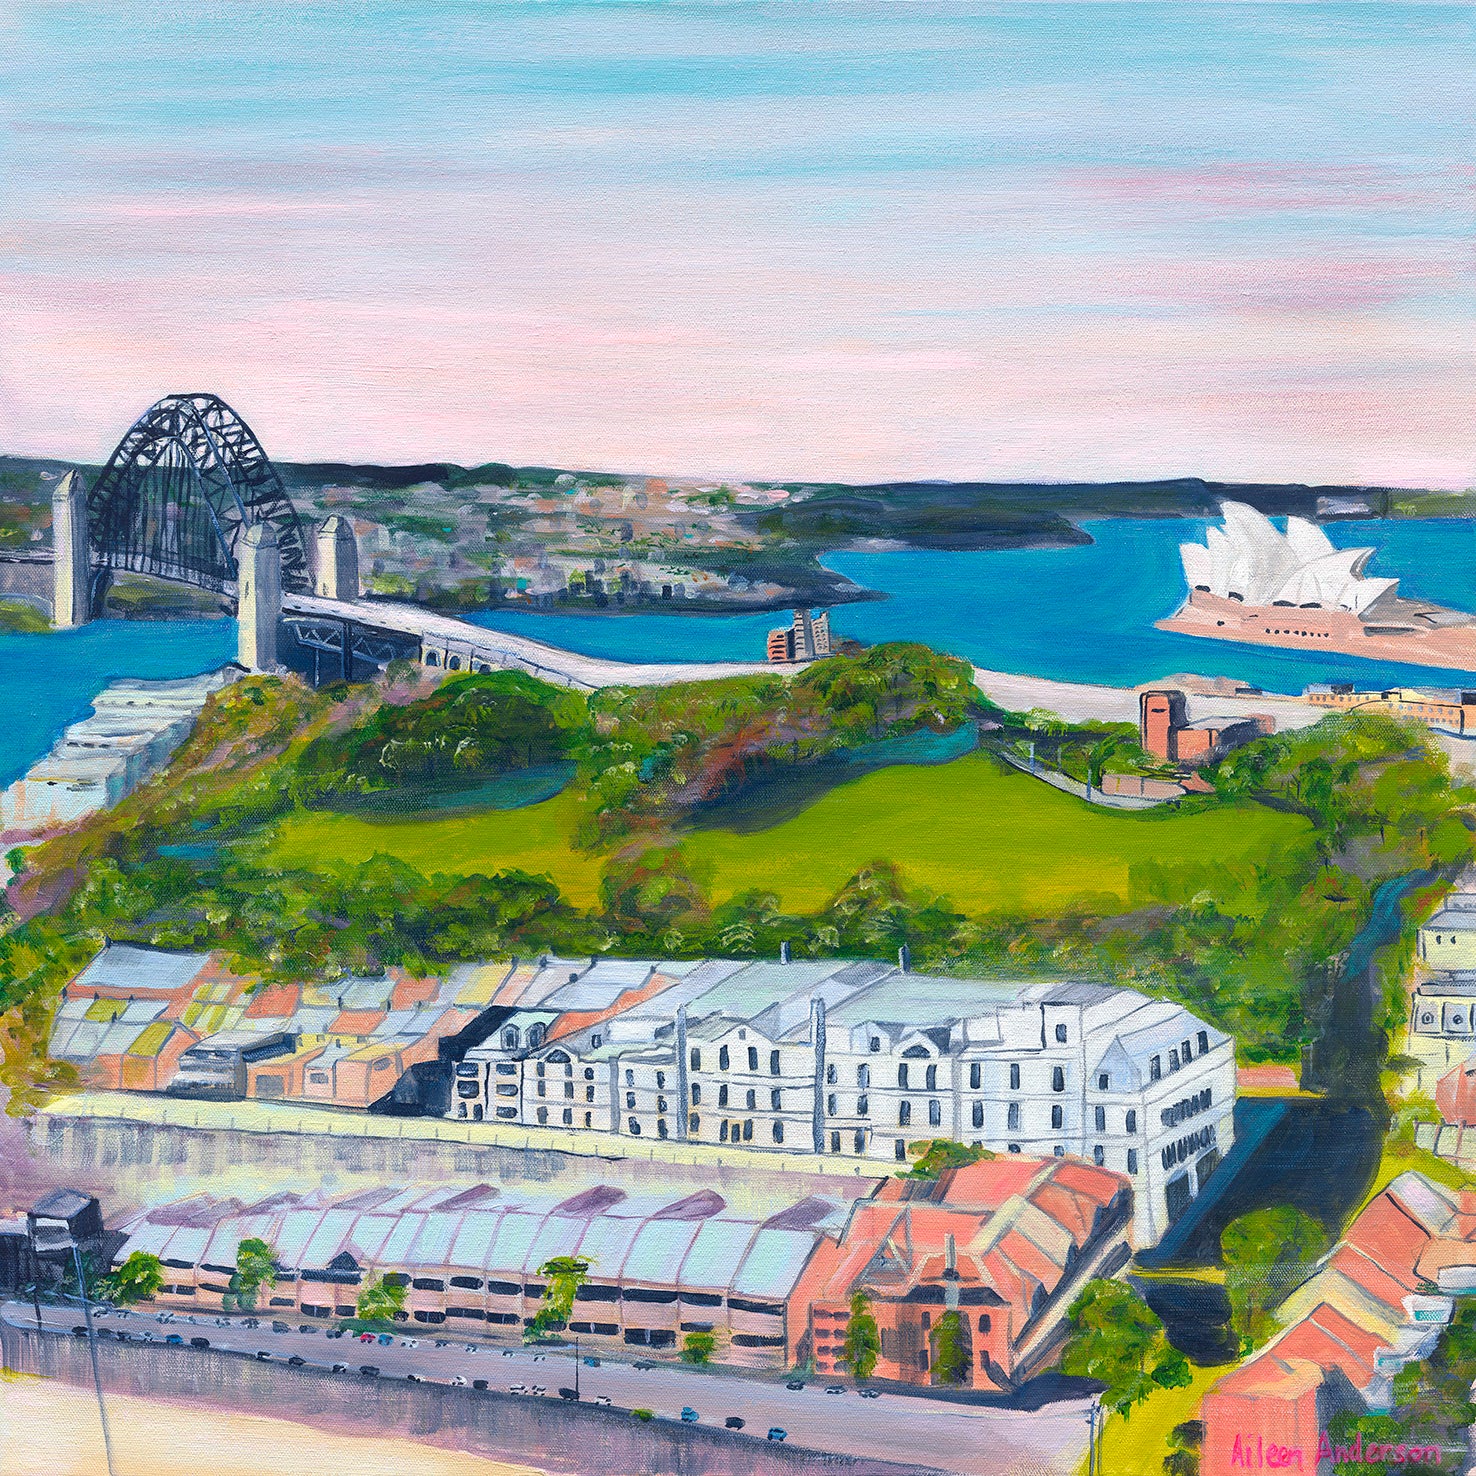 'Sydney Hopes' Painting by Aileen Anderson  (c)2021